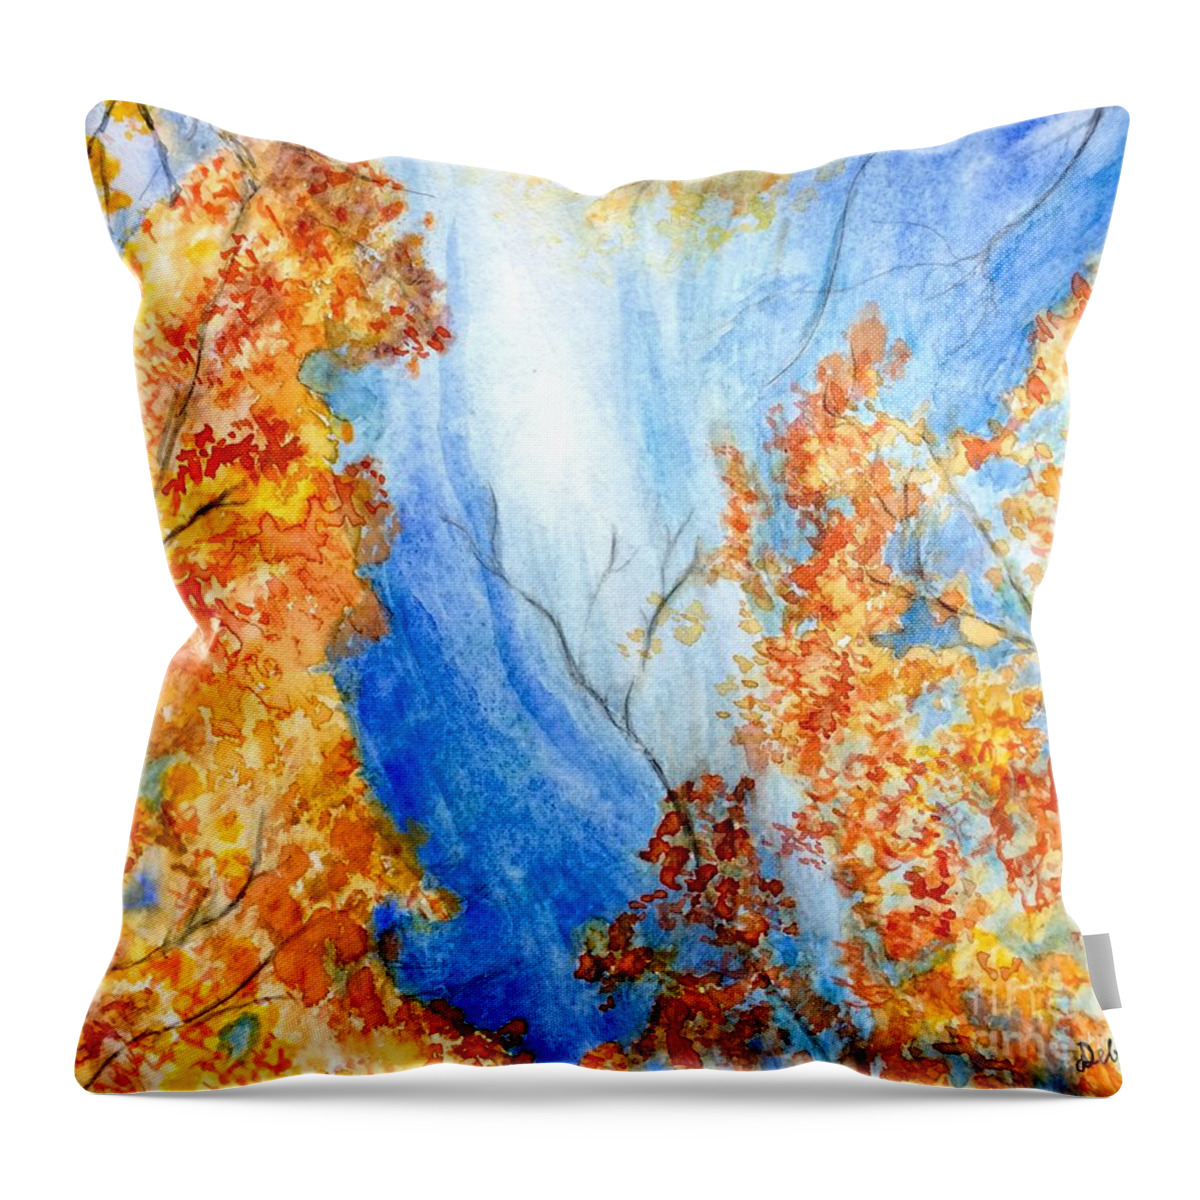 Watercolor Throw Pillow featuring the painting Fall Splendor by Deb Stroh-Larson